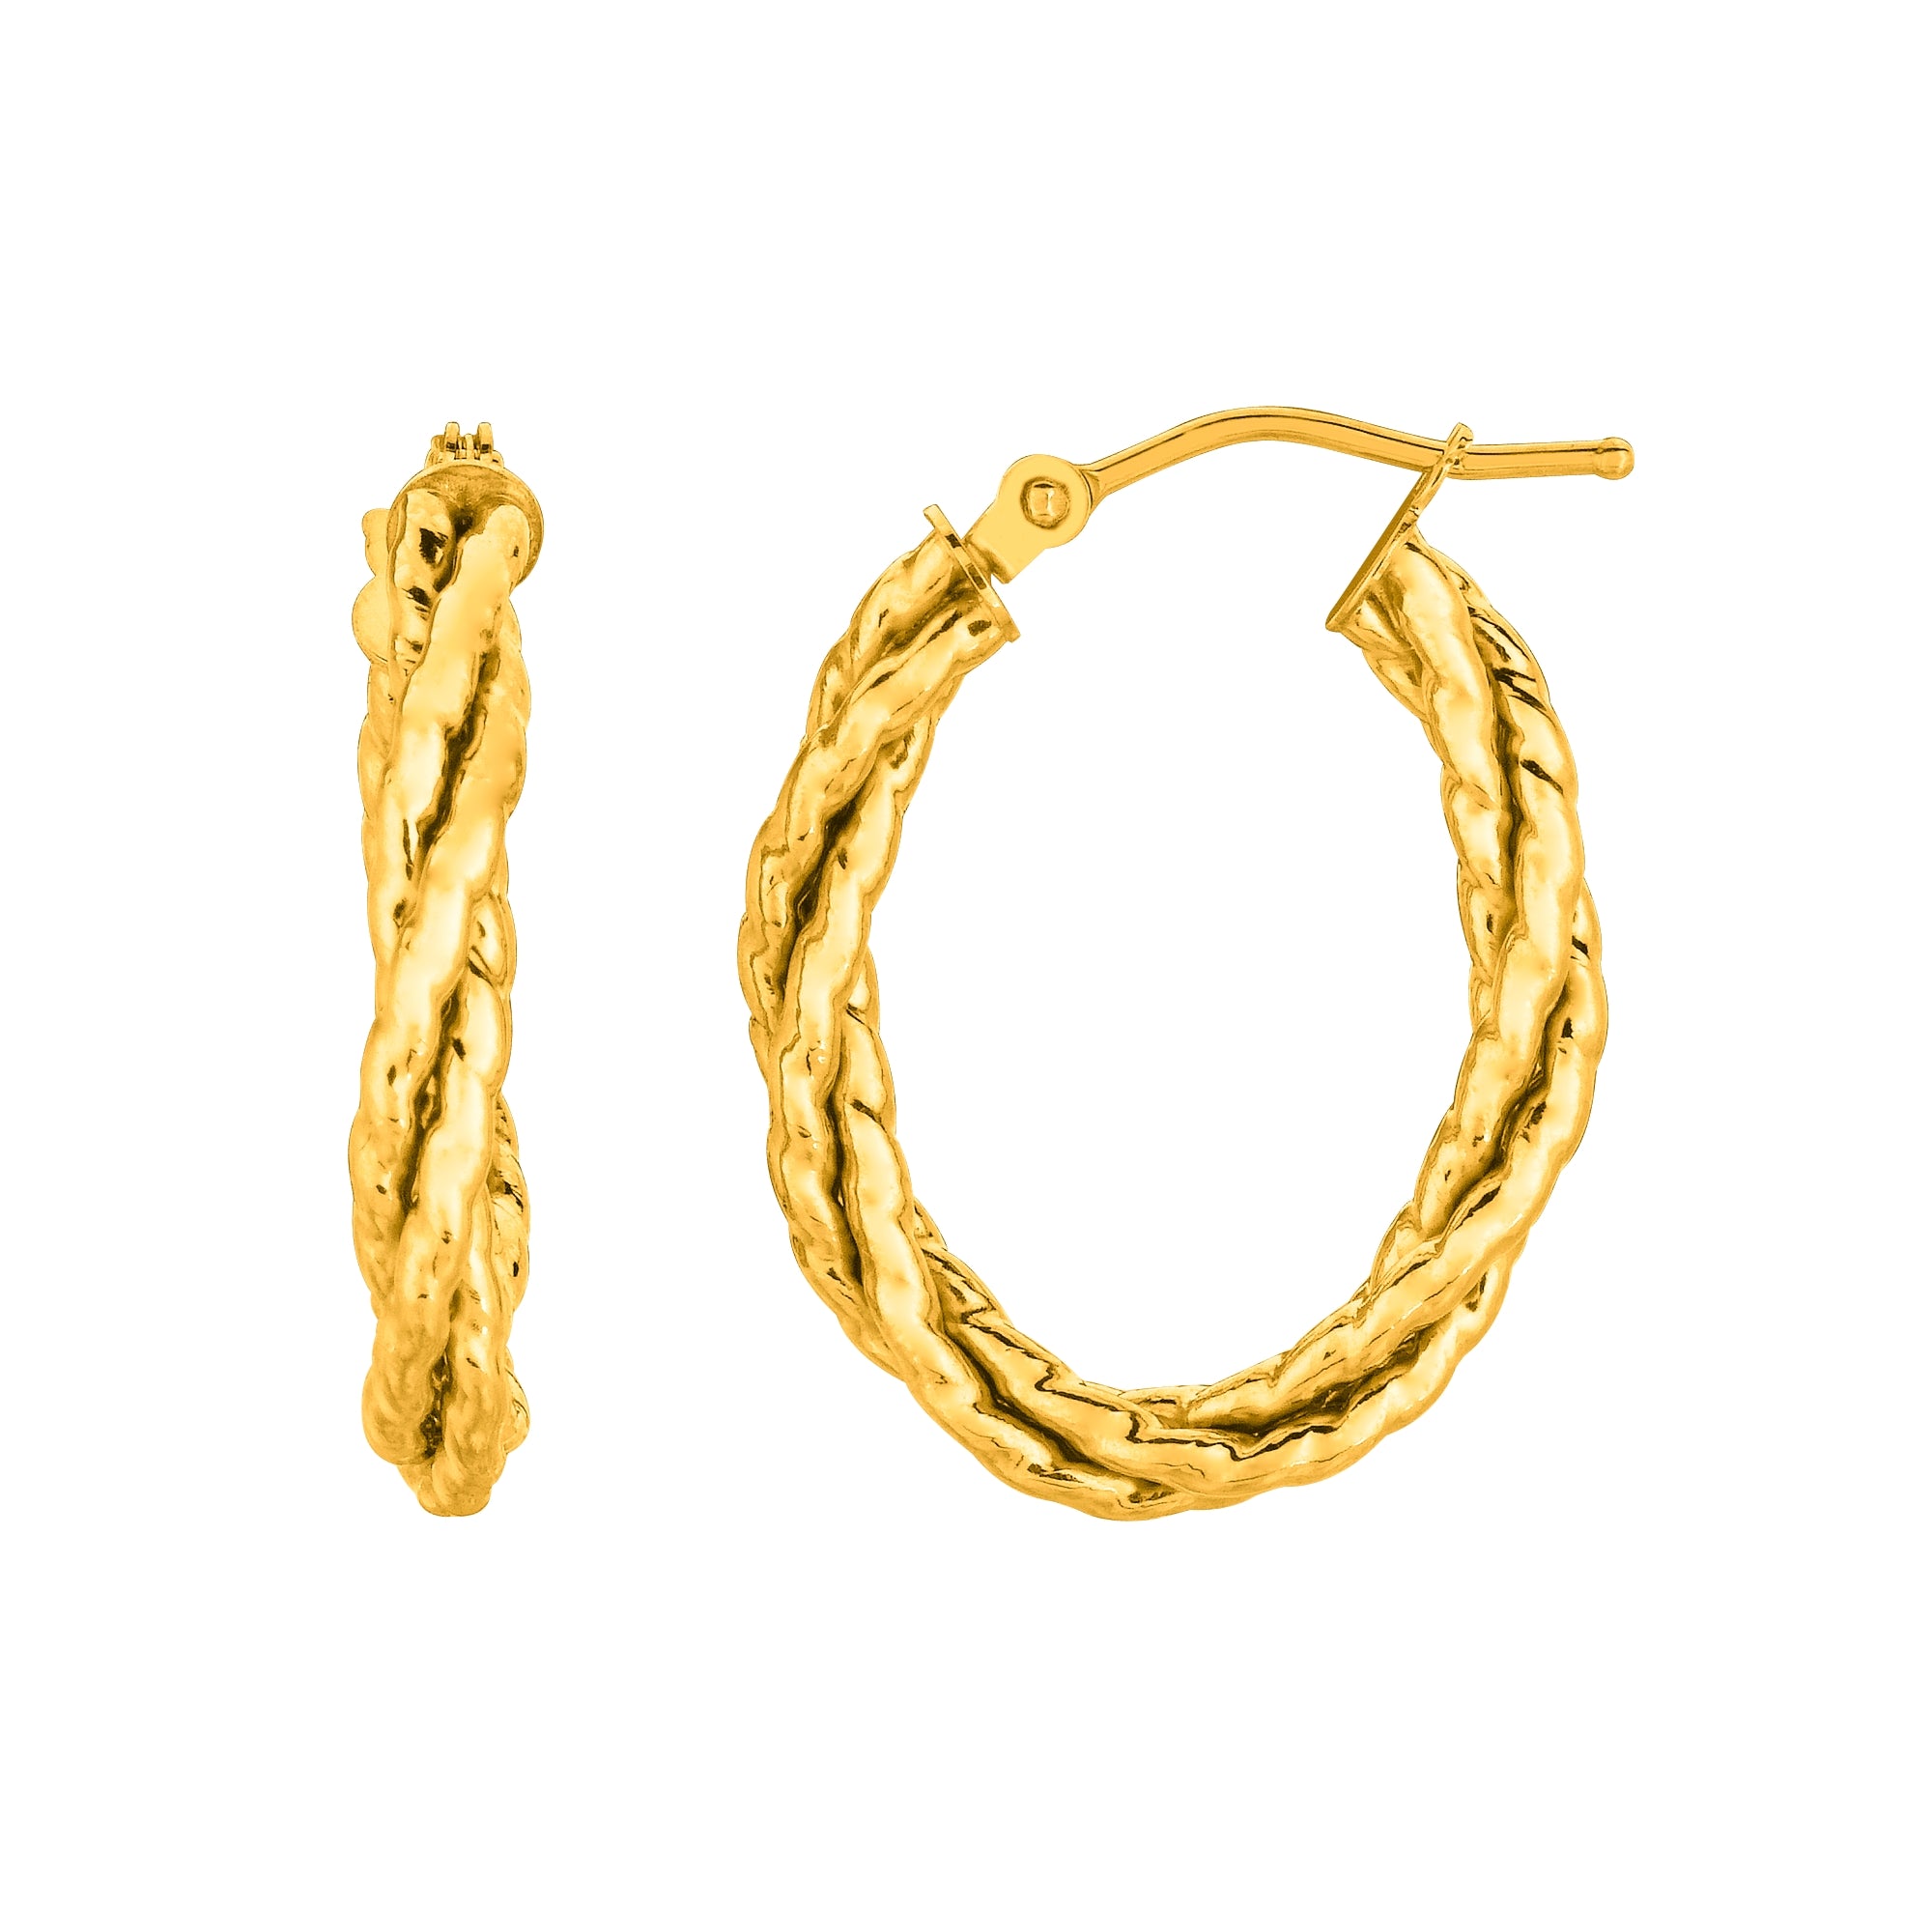 14K Yellow Gold Twisted Oval Hoop Earrings fine designer jewelry for men and women